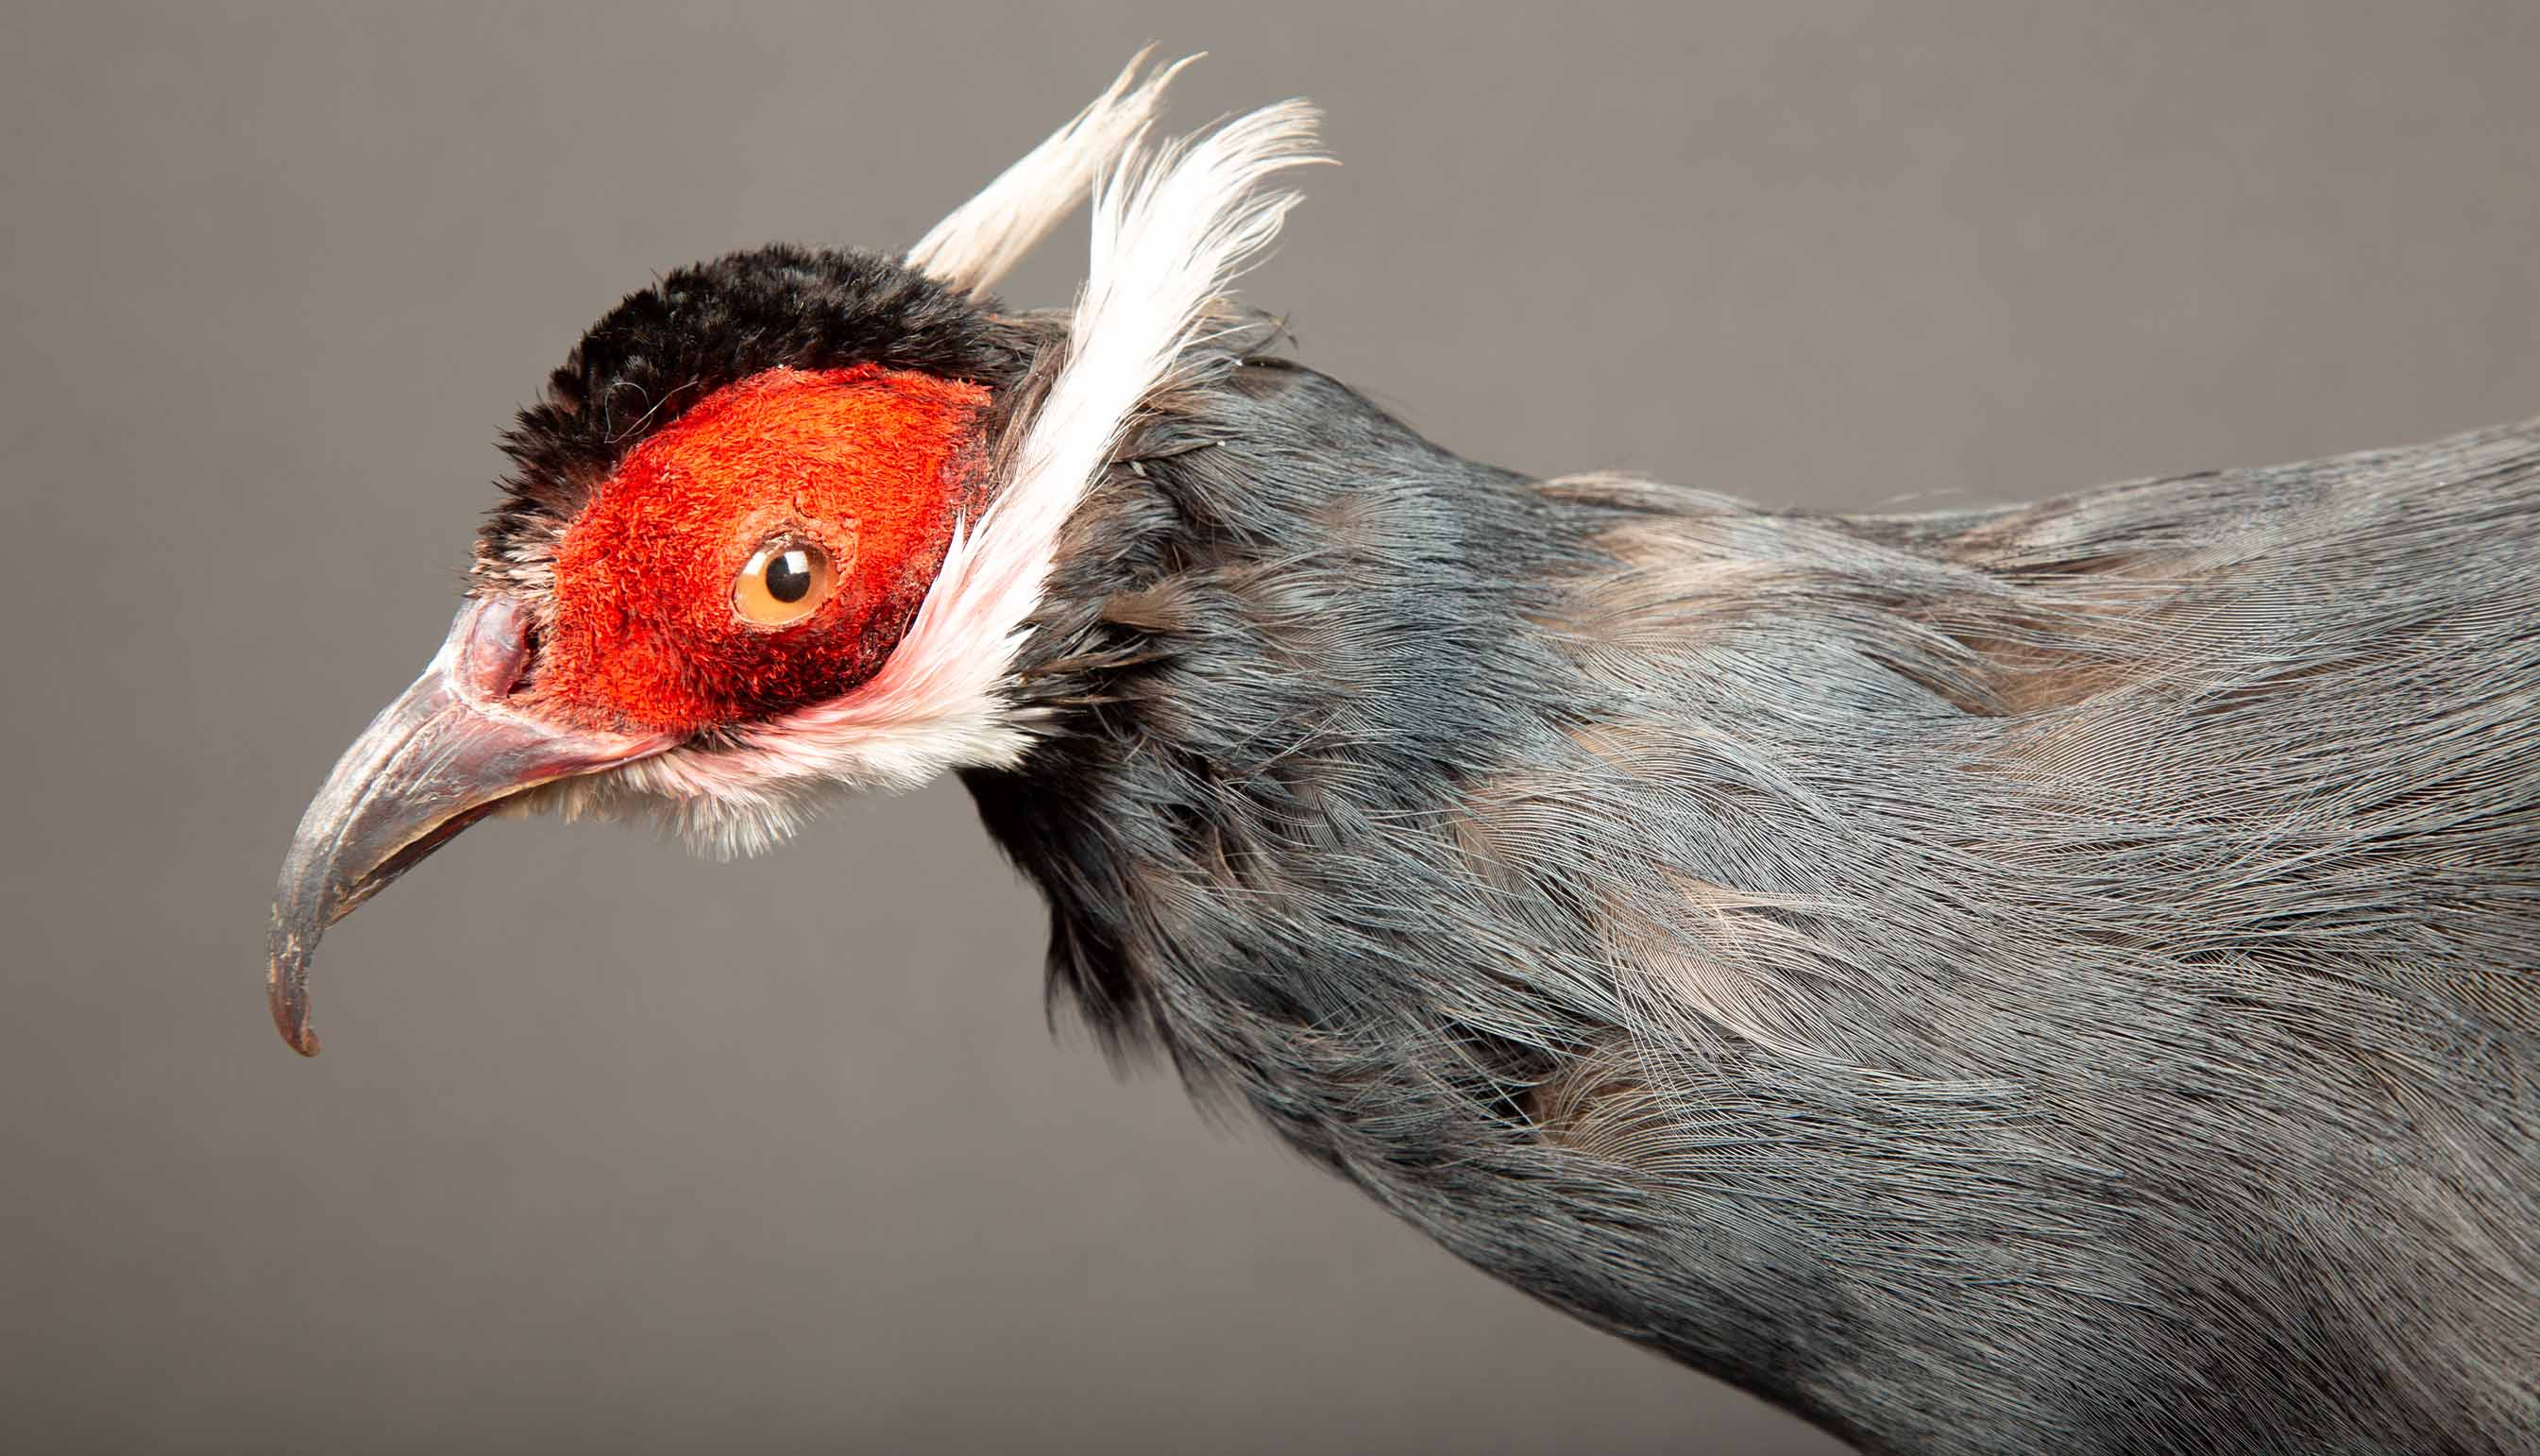 Exquisite Taxidermy Blue Eared-Pheasant